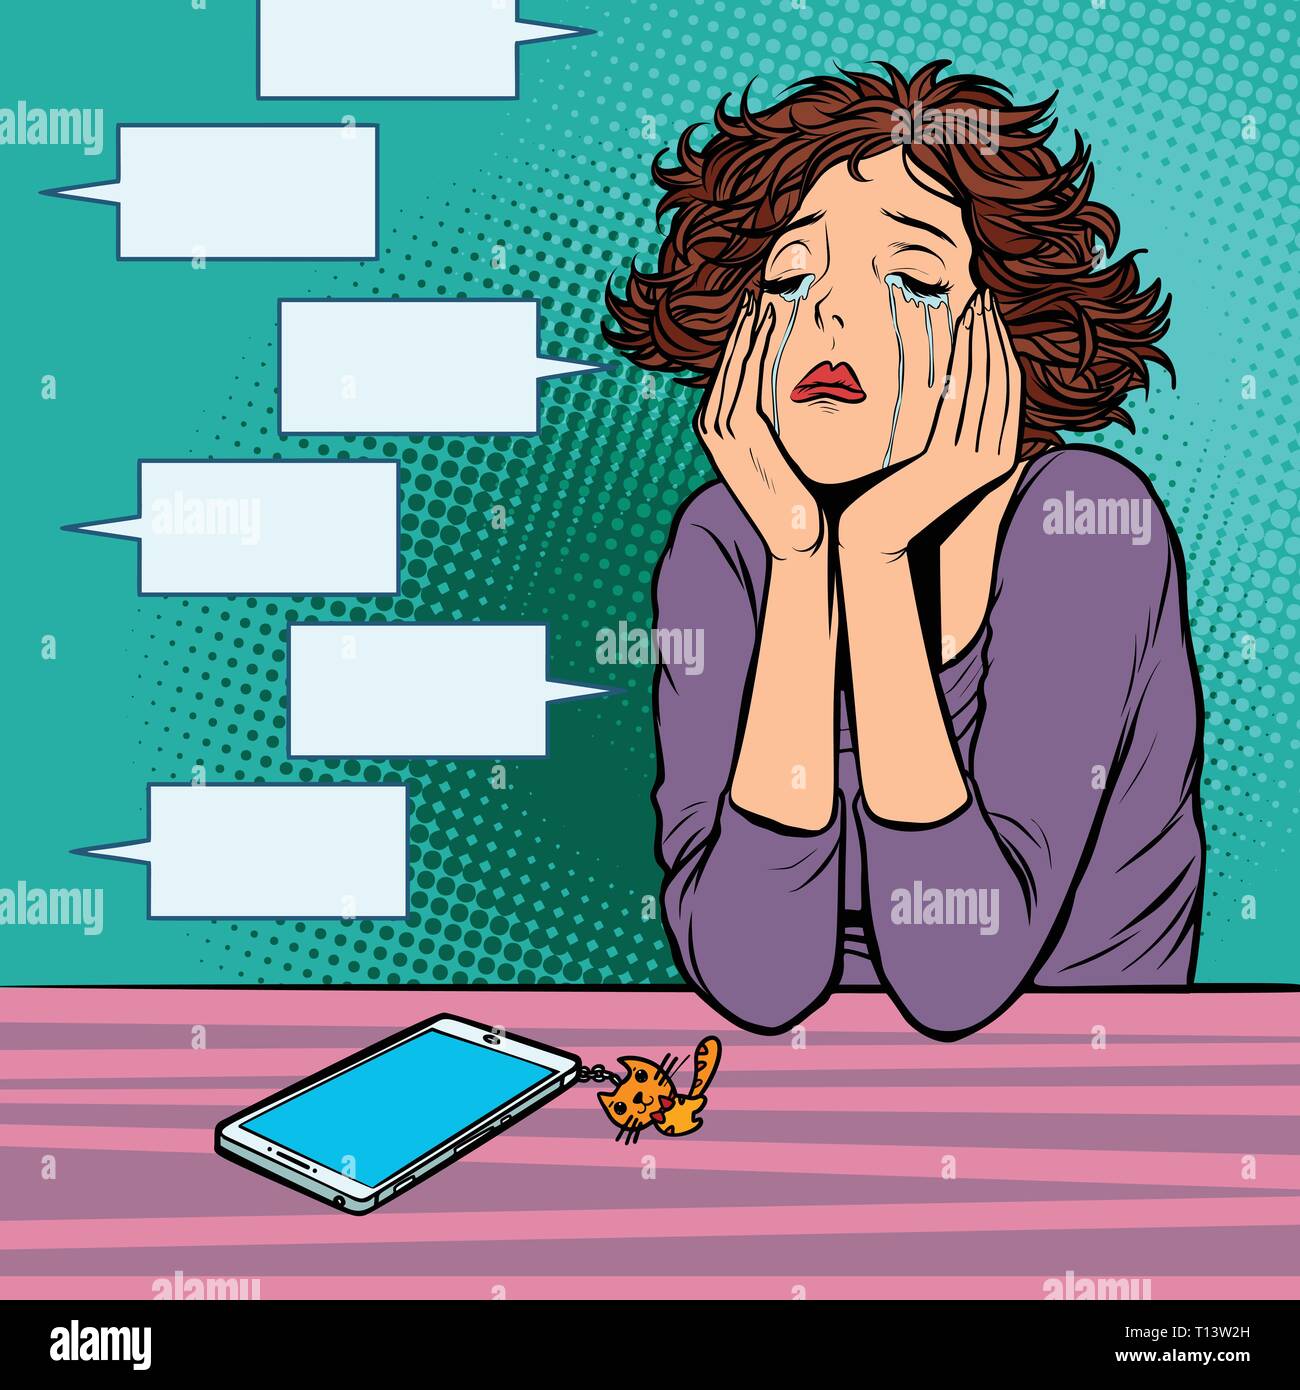 zero messages in messenger. lonely unhappy woman Stock Vector